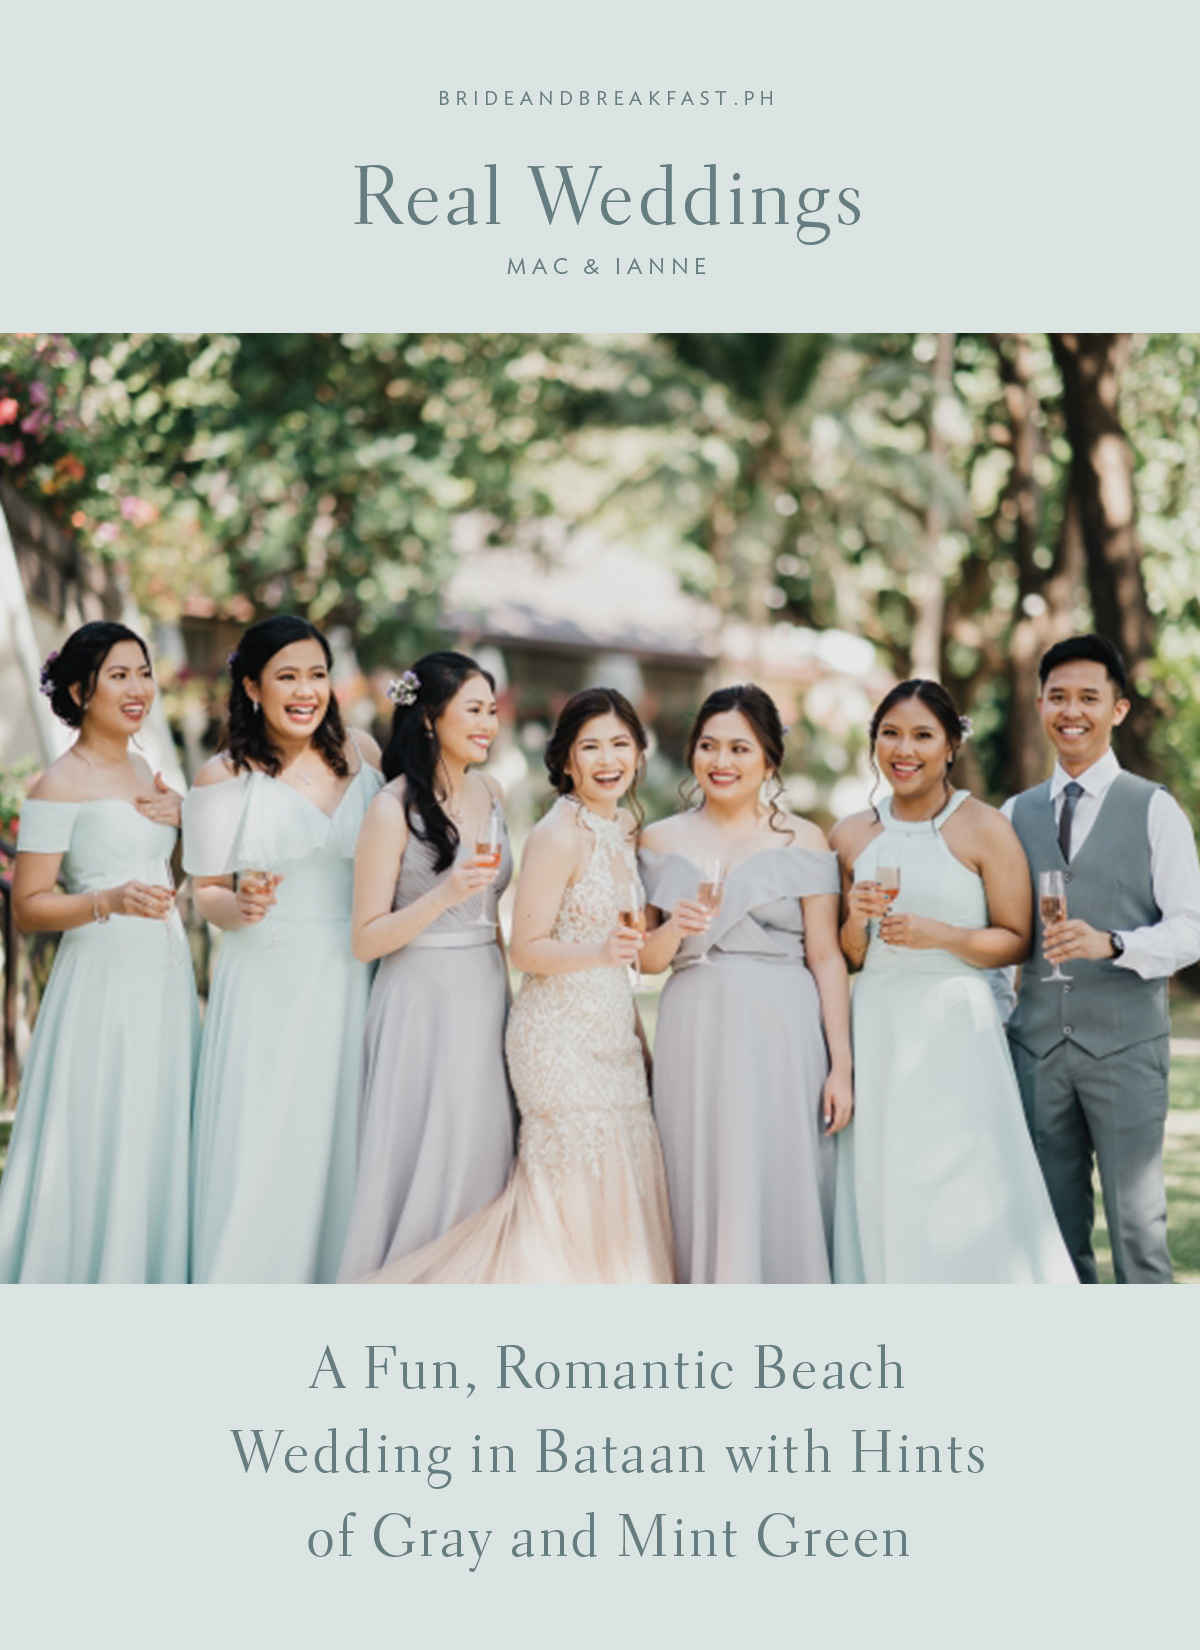 A Fun, Romantic Beach Wedding in Bataan with Hints of Gray and Mint Green